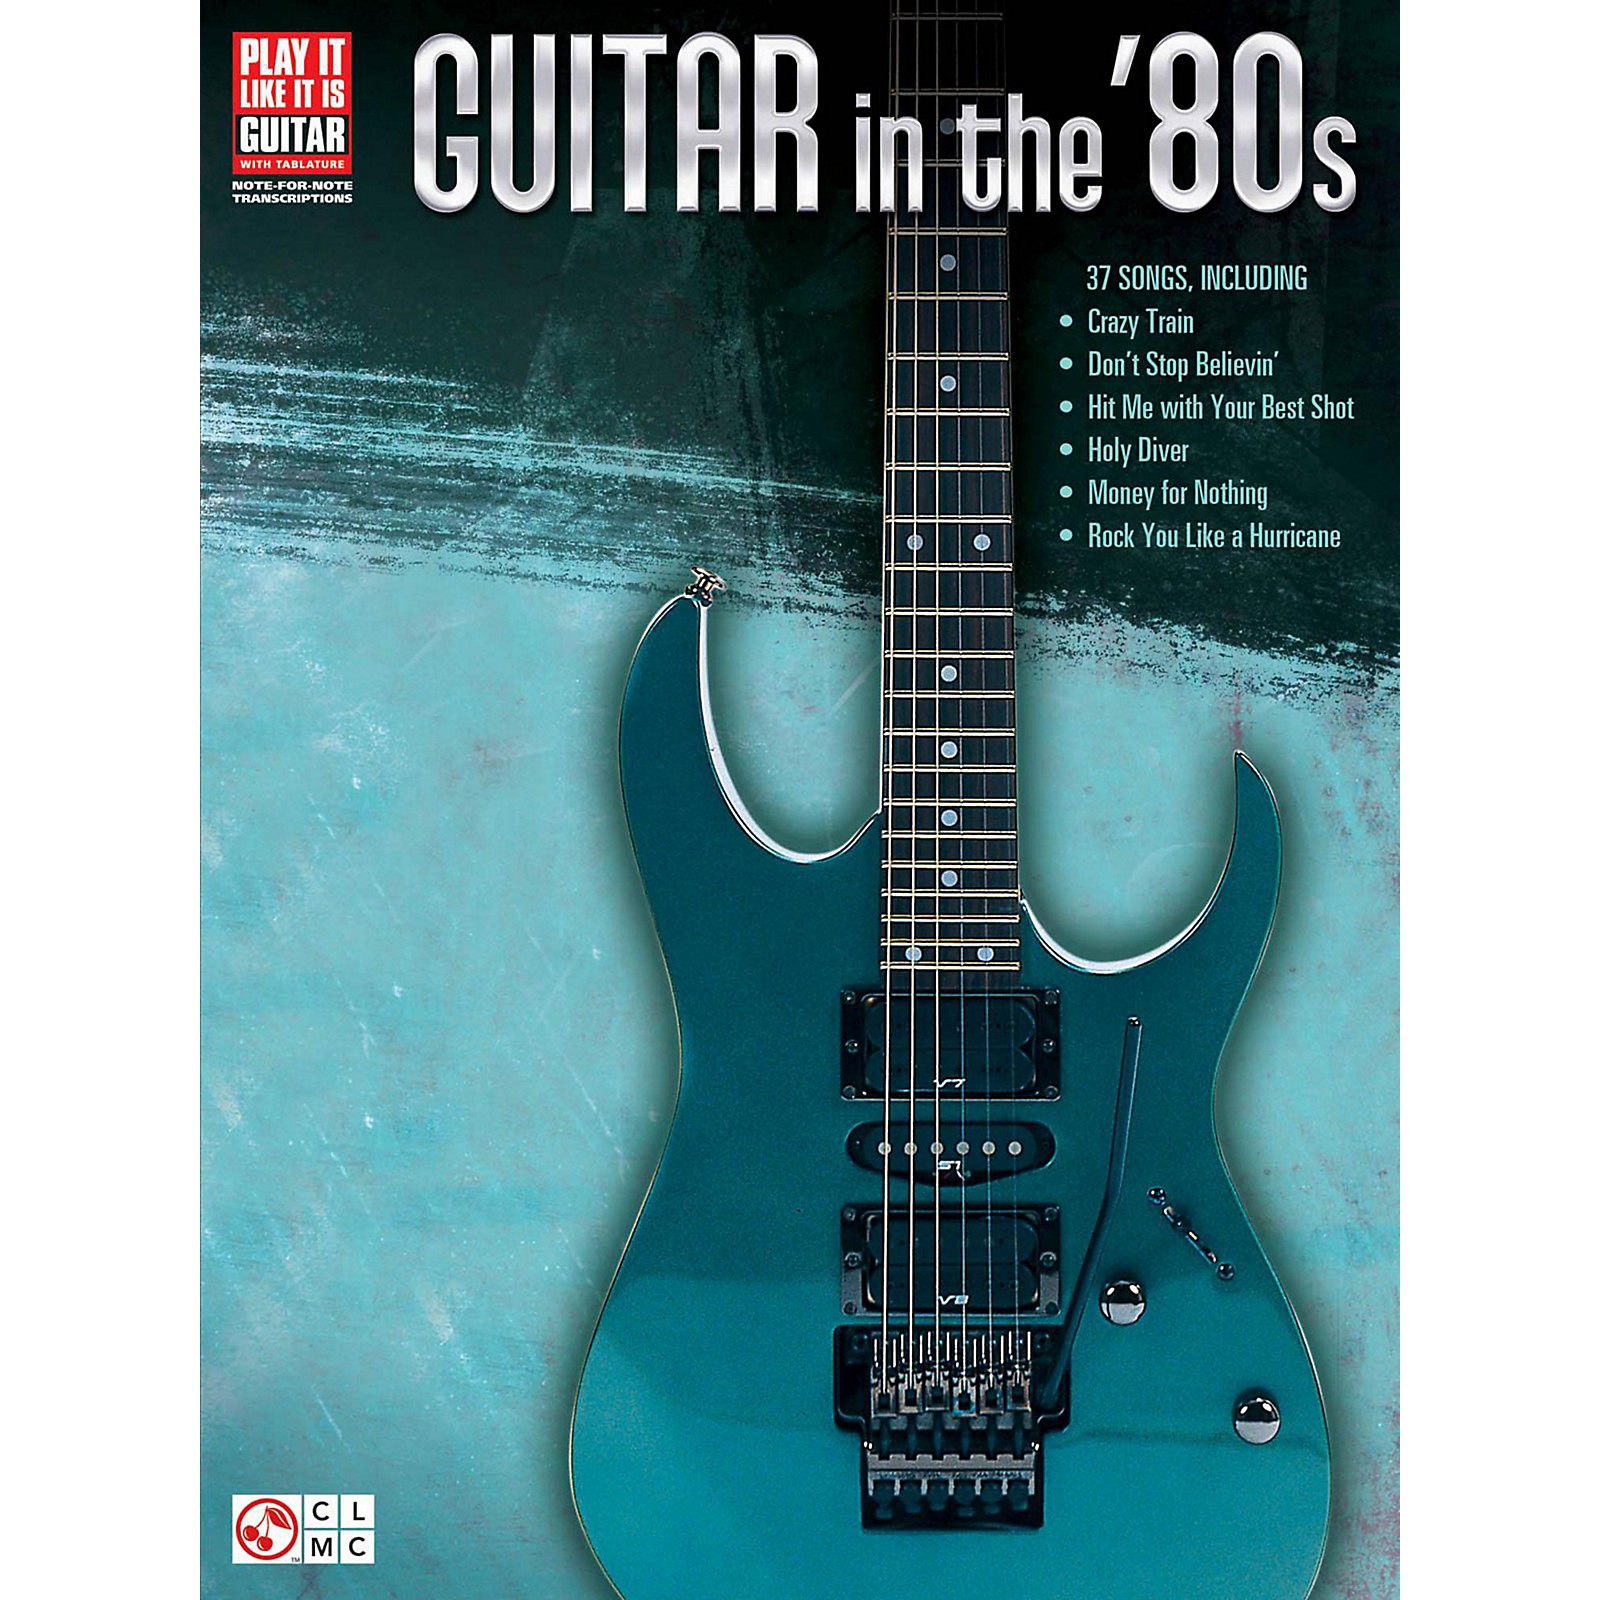 Guitar in the '80s (Sheet Music) Play It Like It Is (116768) by